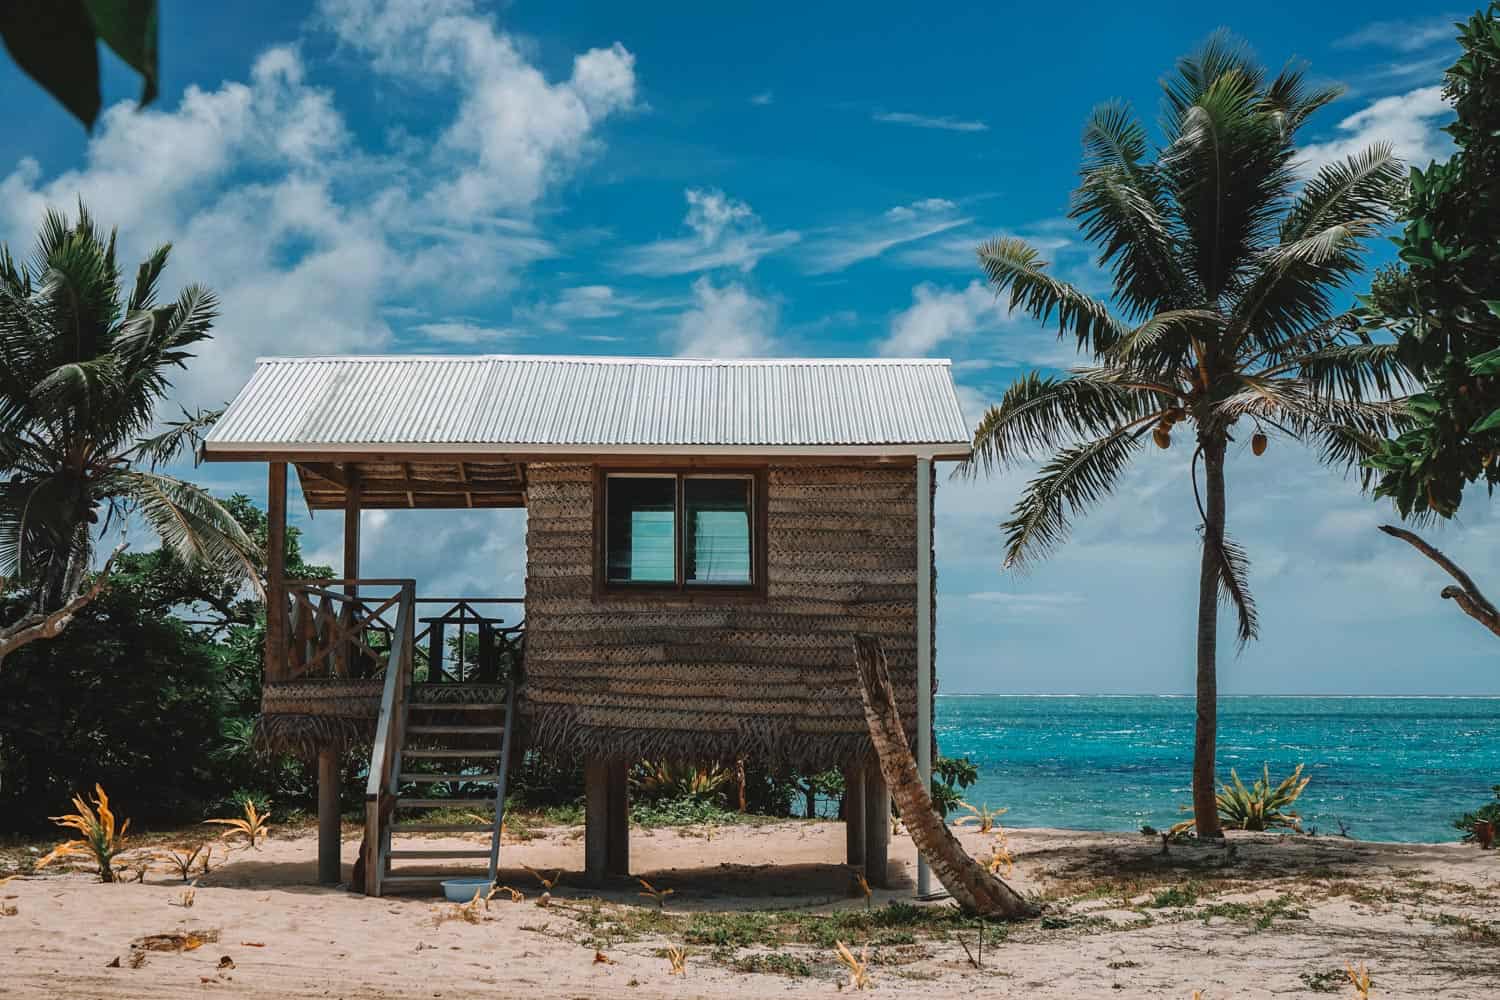 My beautiful beach hut in Ha’apai - I highly recommend staying at Matafonua...